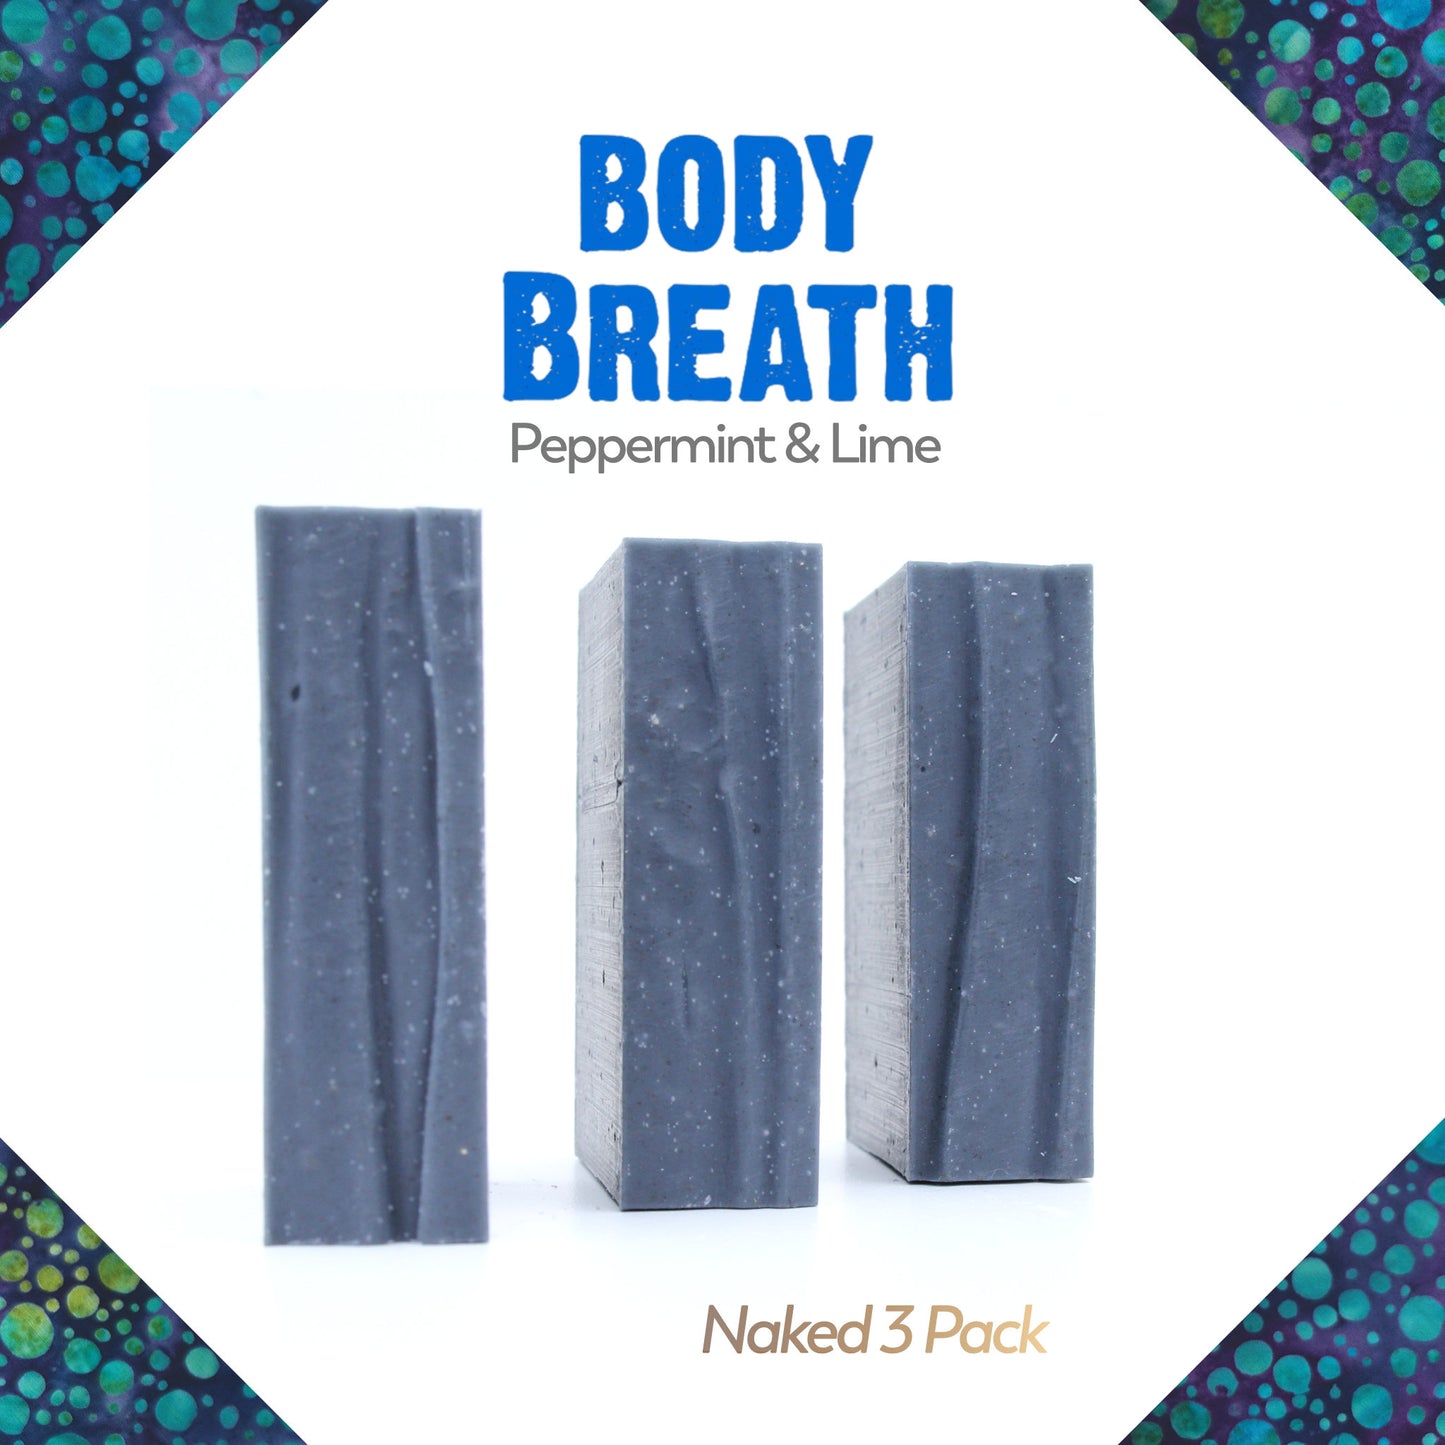 Naked three pack of Body Breath Peppermint essential oil organic bar soap from ground Soap. 